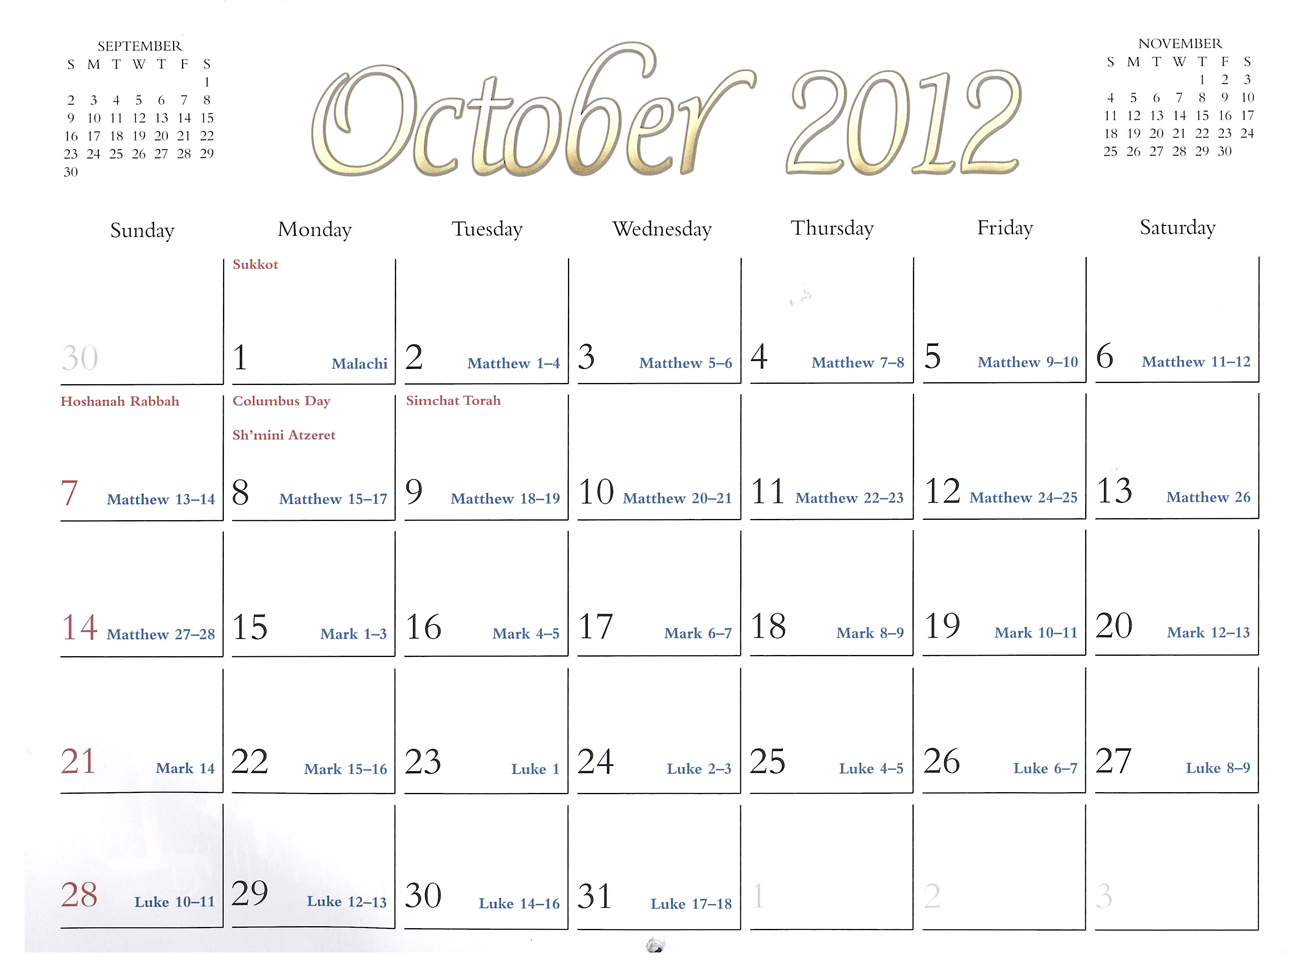 2012 Prophecy Calendar: October - Paul's Letter to Timothy